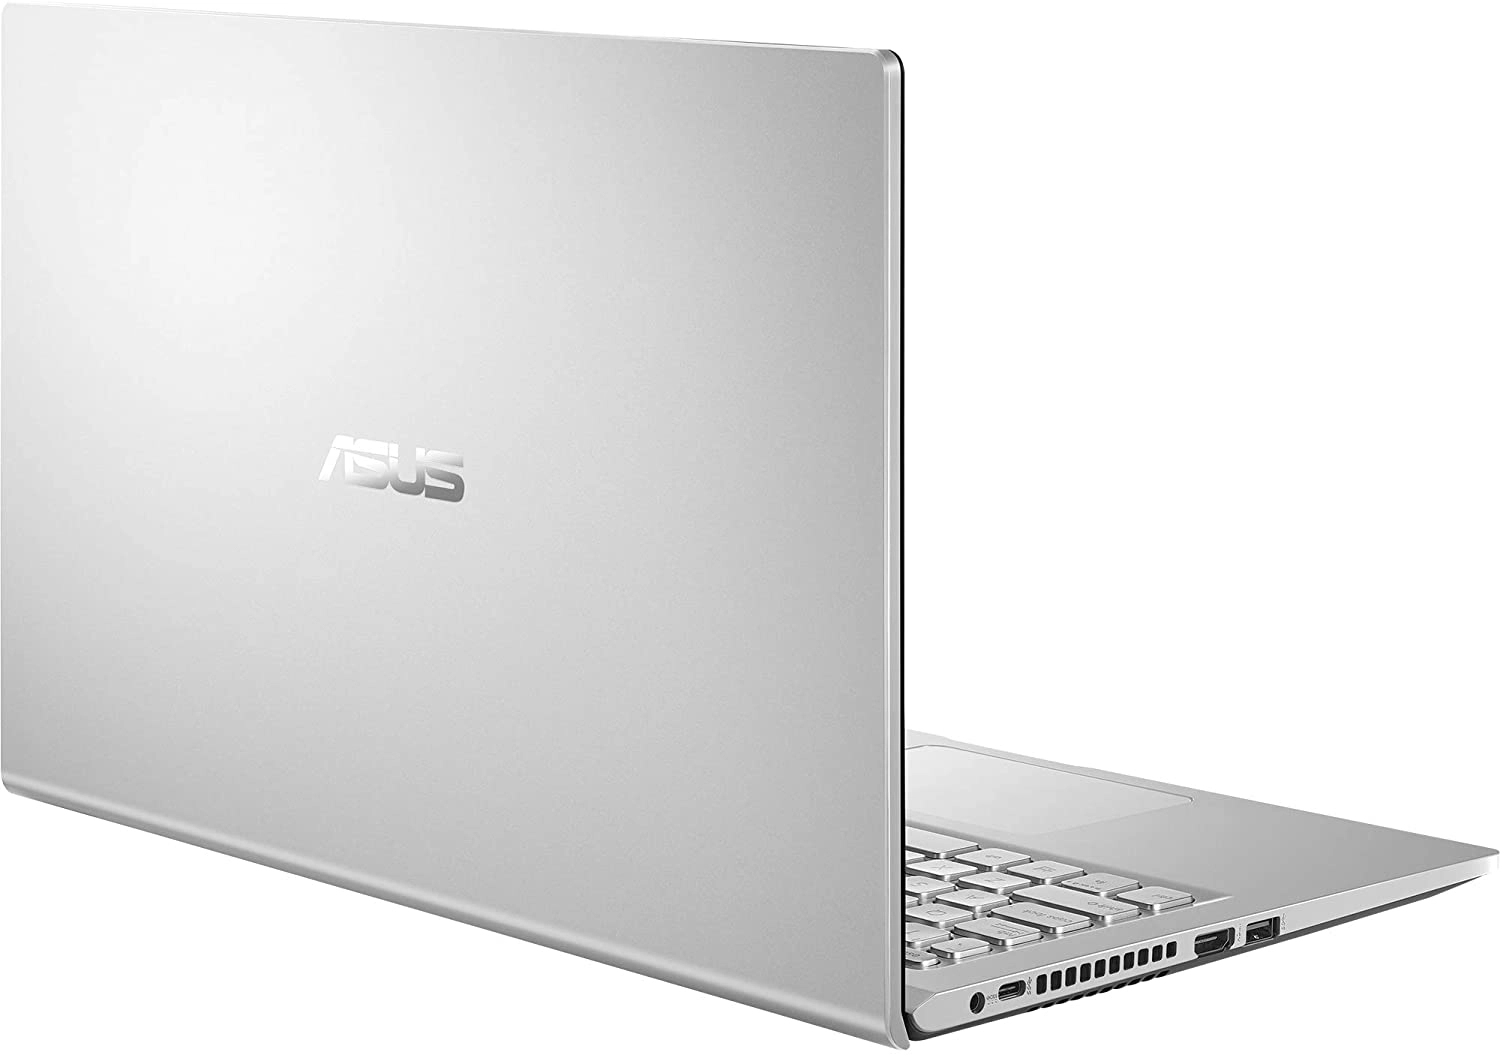 Asus F515MA-BR040 laptop image